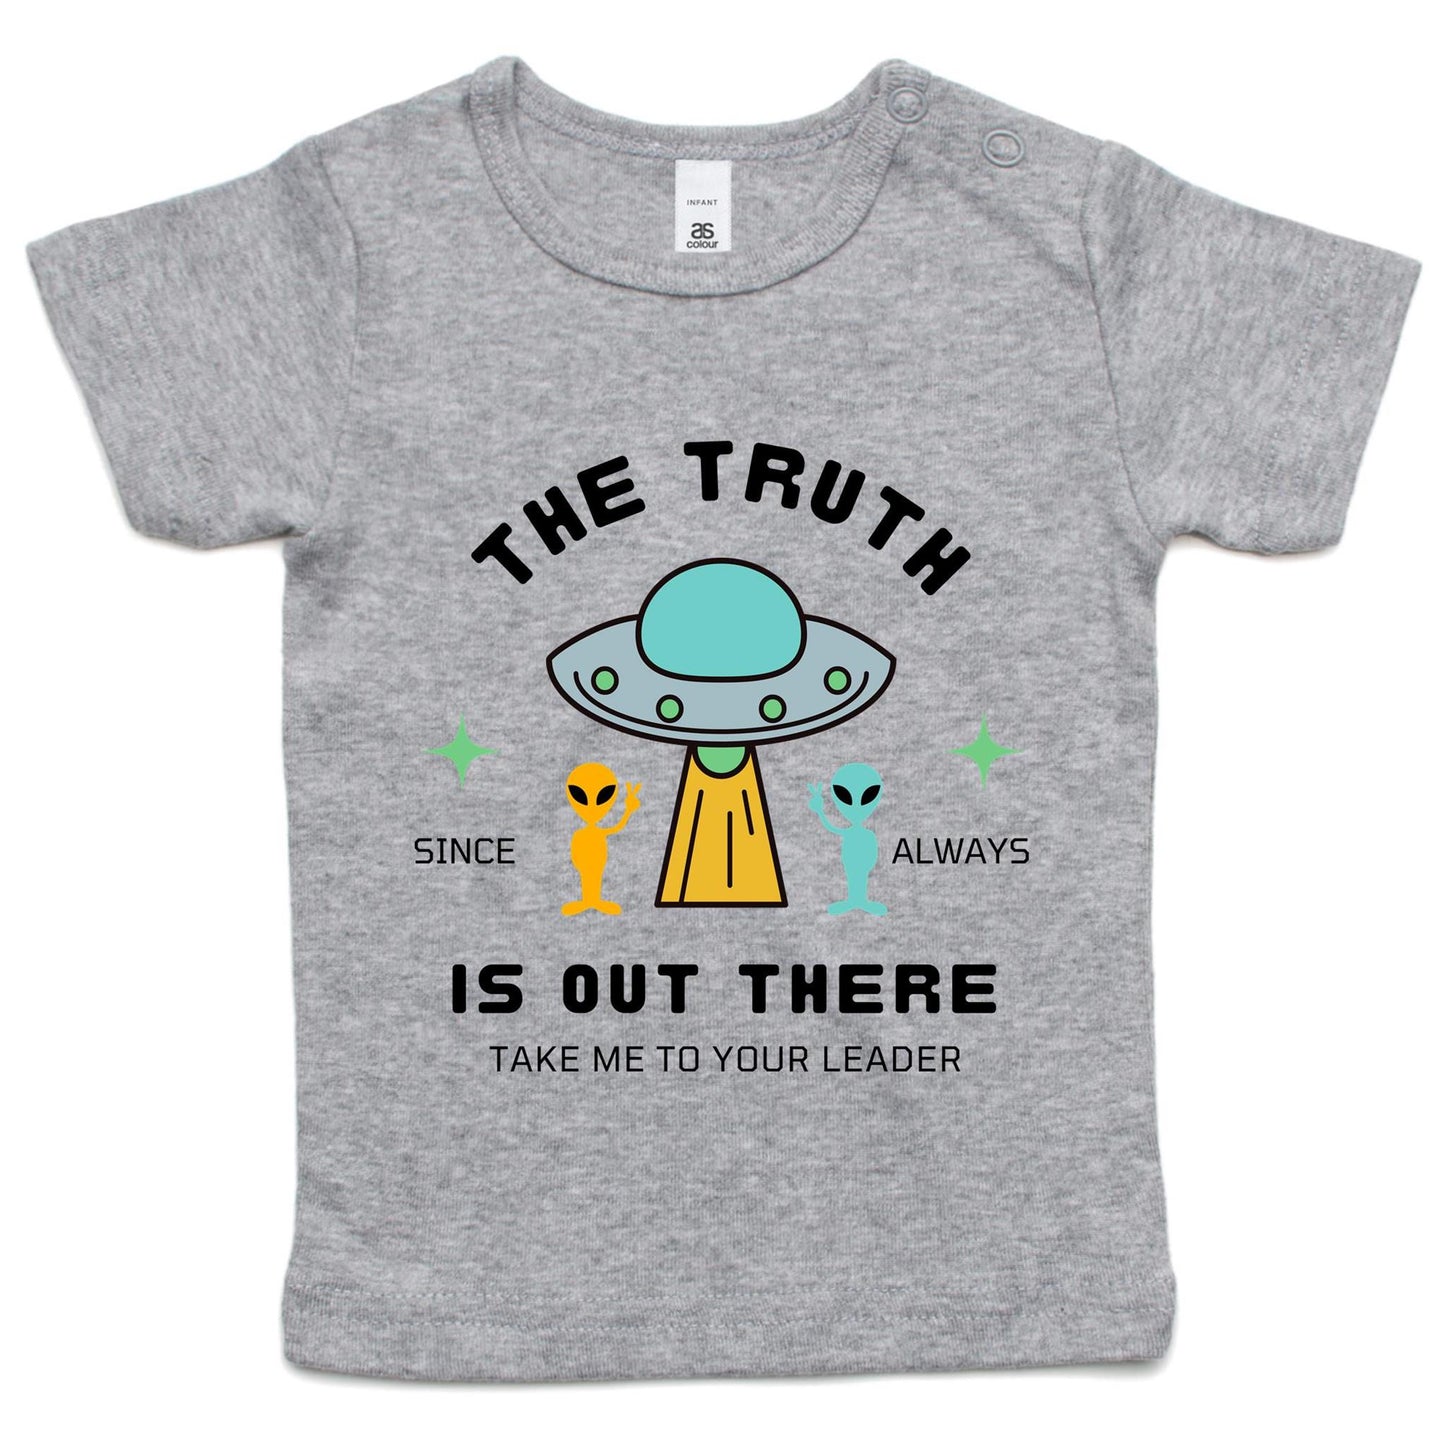 The Truth Is Out There - Baby T-shirt Grey Marle Baby T-shirt Sci Fi